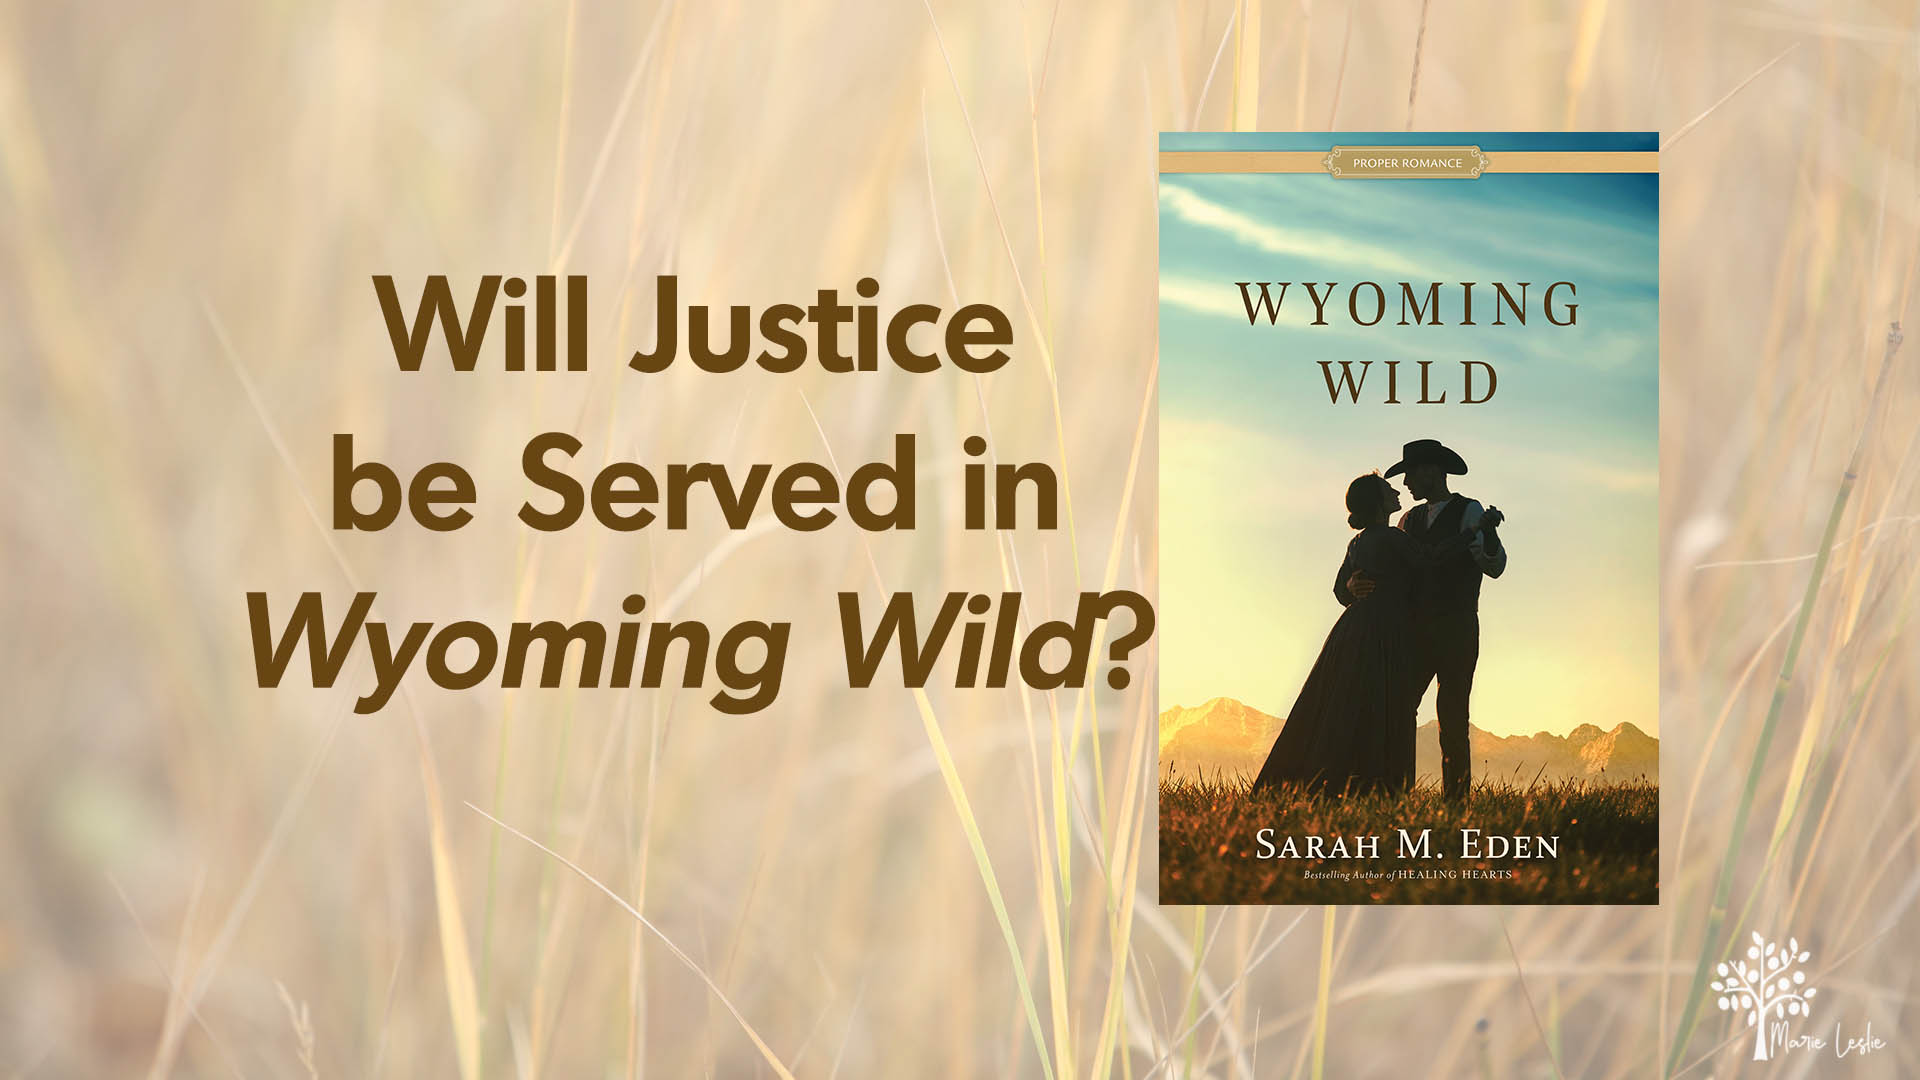 Will Justice be Served in Wyoming Wild?